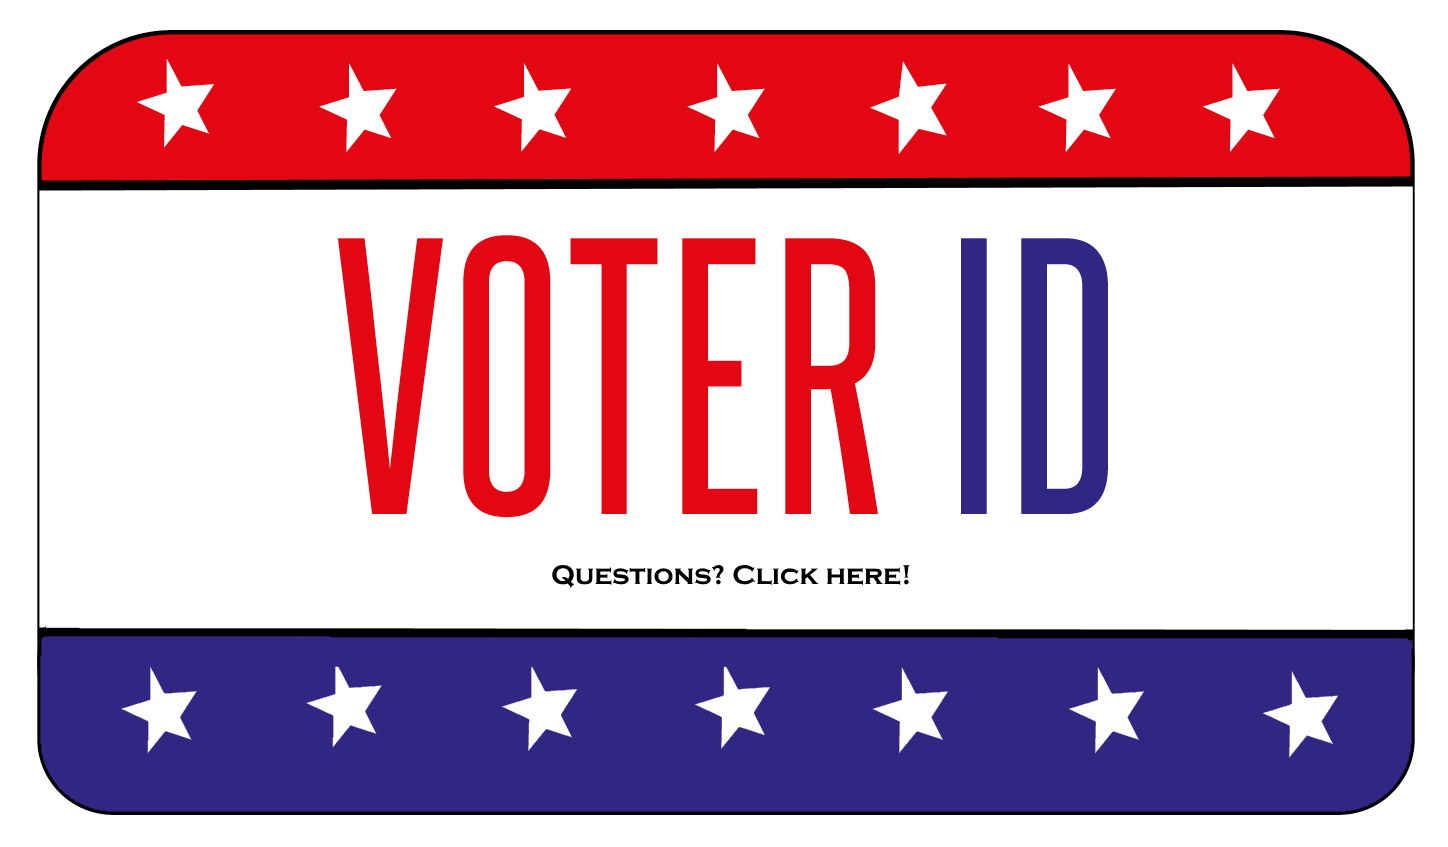 Voter ID - Questions? Click here!